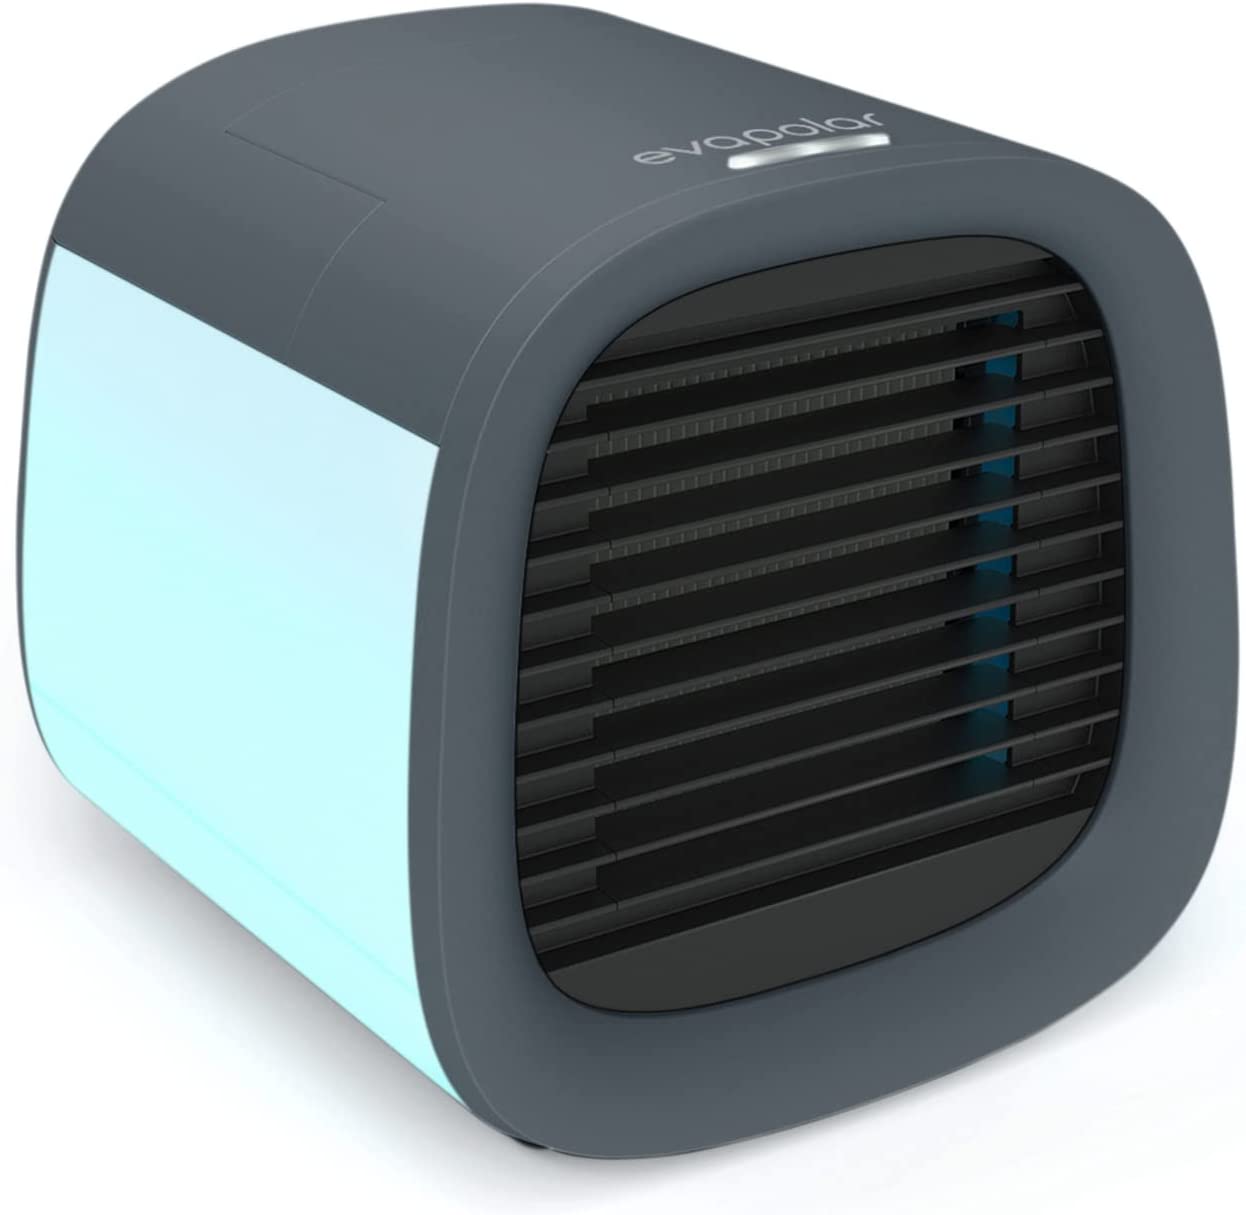 EVAPOLAR evaCHILL - Personal Portable Air Cooler and Humidifier, with USB Connectivity and LED Light, Grey - SILBERSHELL